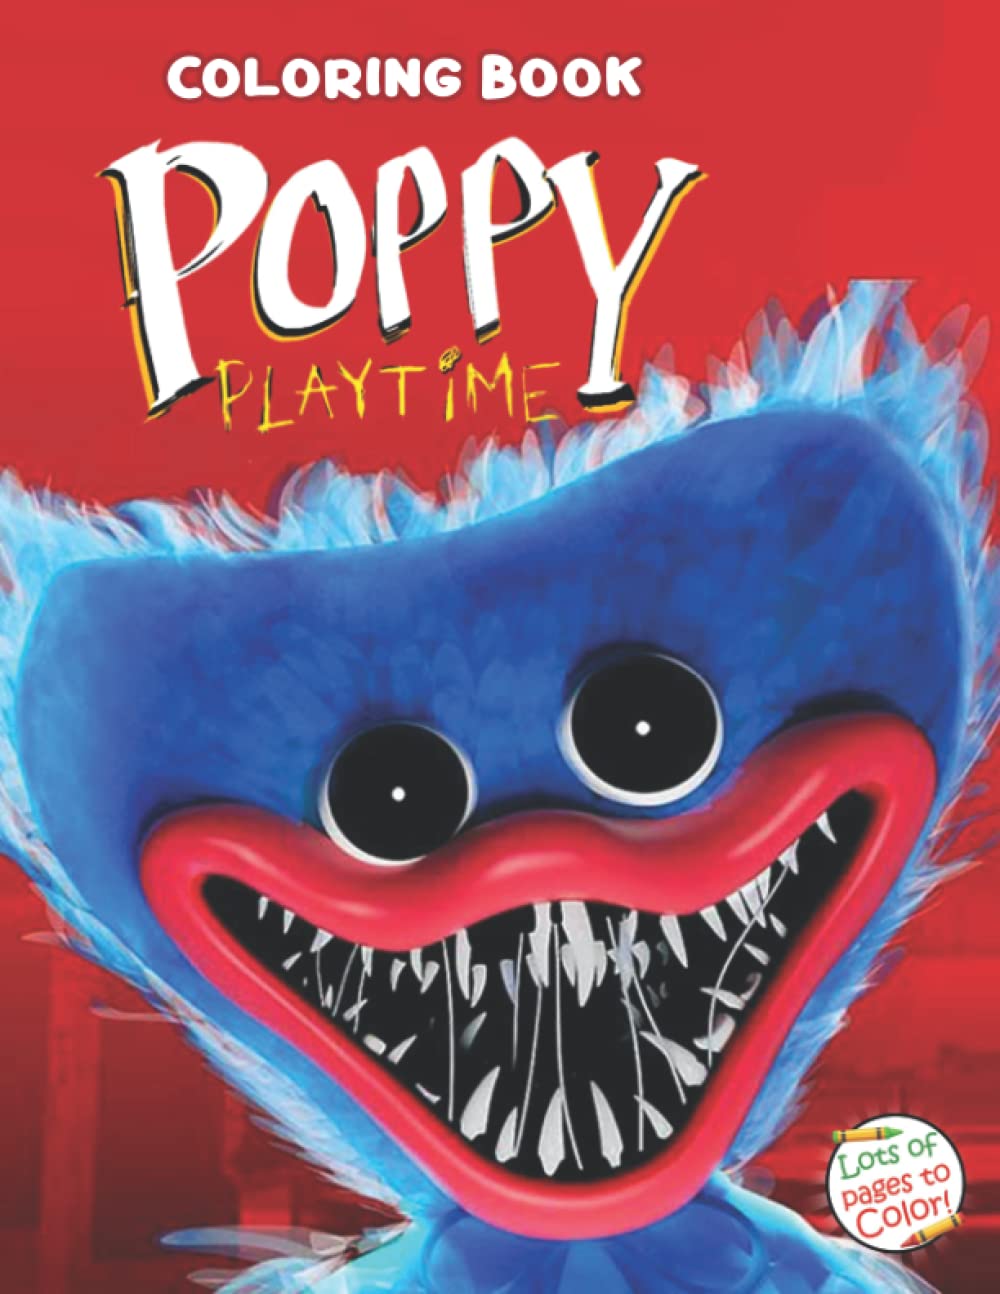 Poppy Playtime Huggy Wuggy Wallpapers - Wallpaper Cave, poppy playtime  huggy wuggy and poppy 